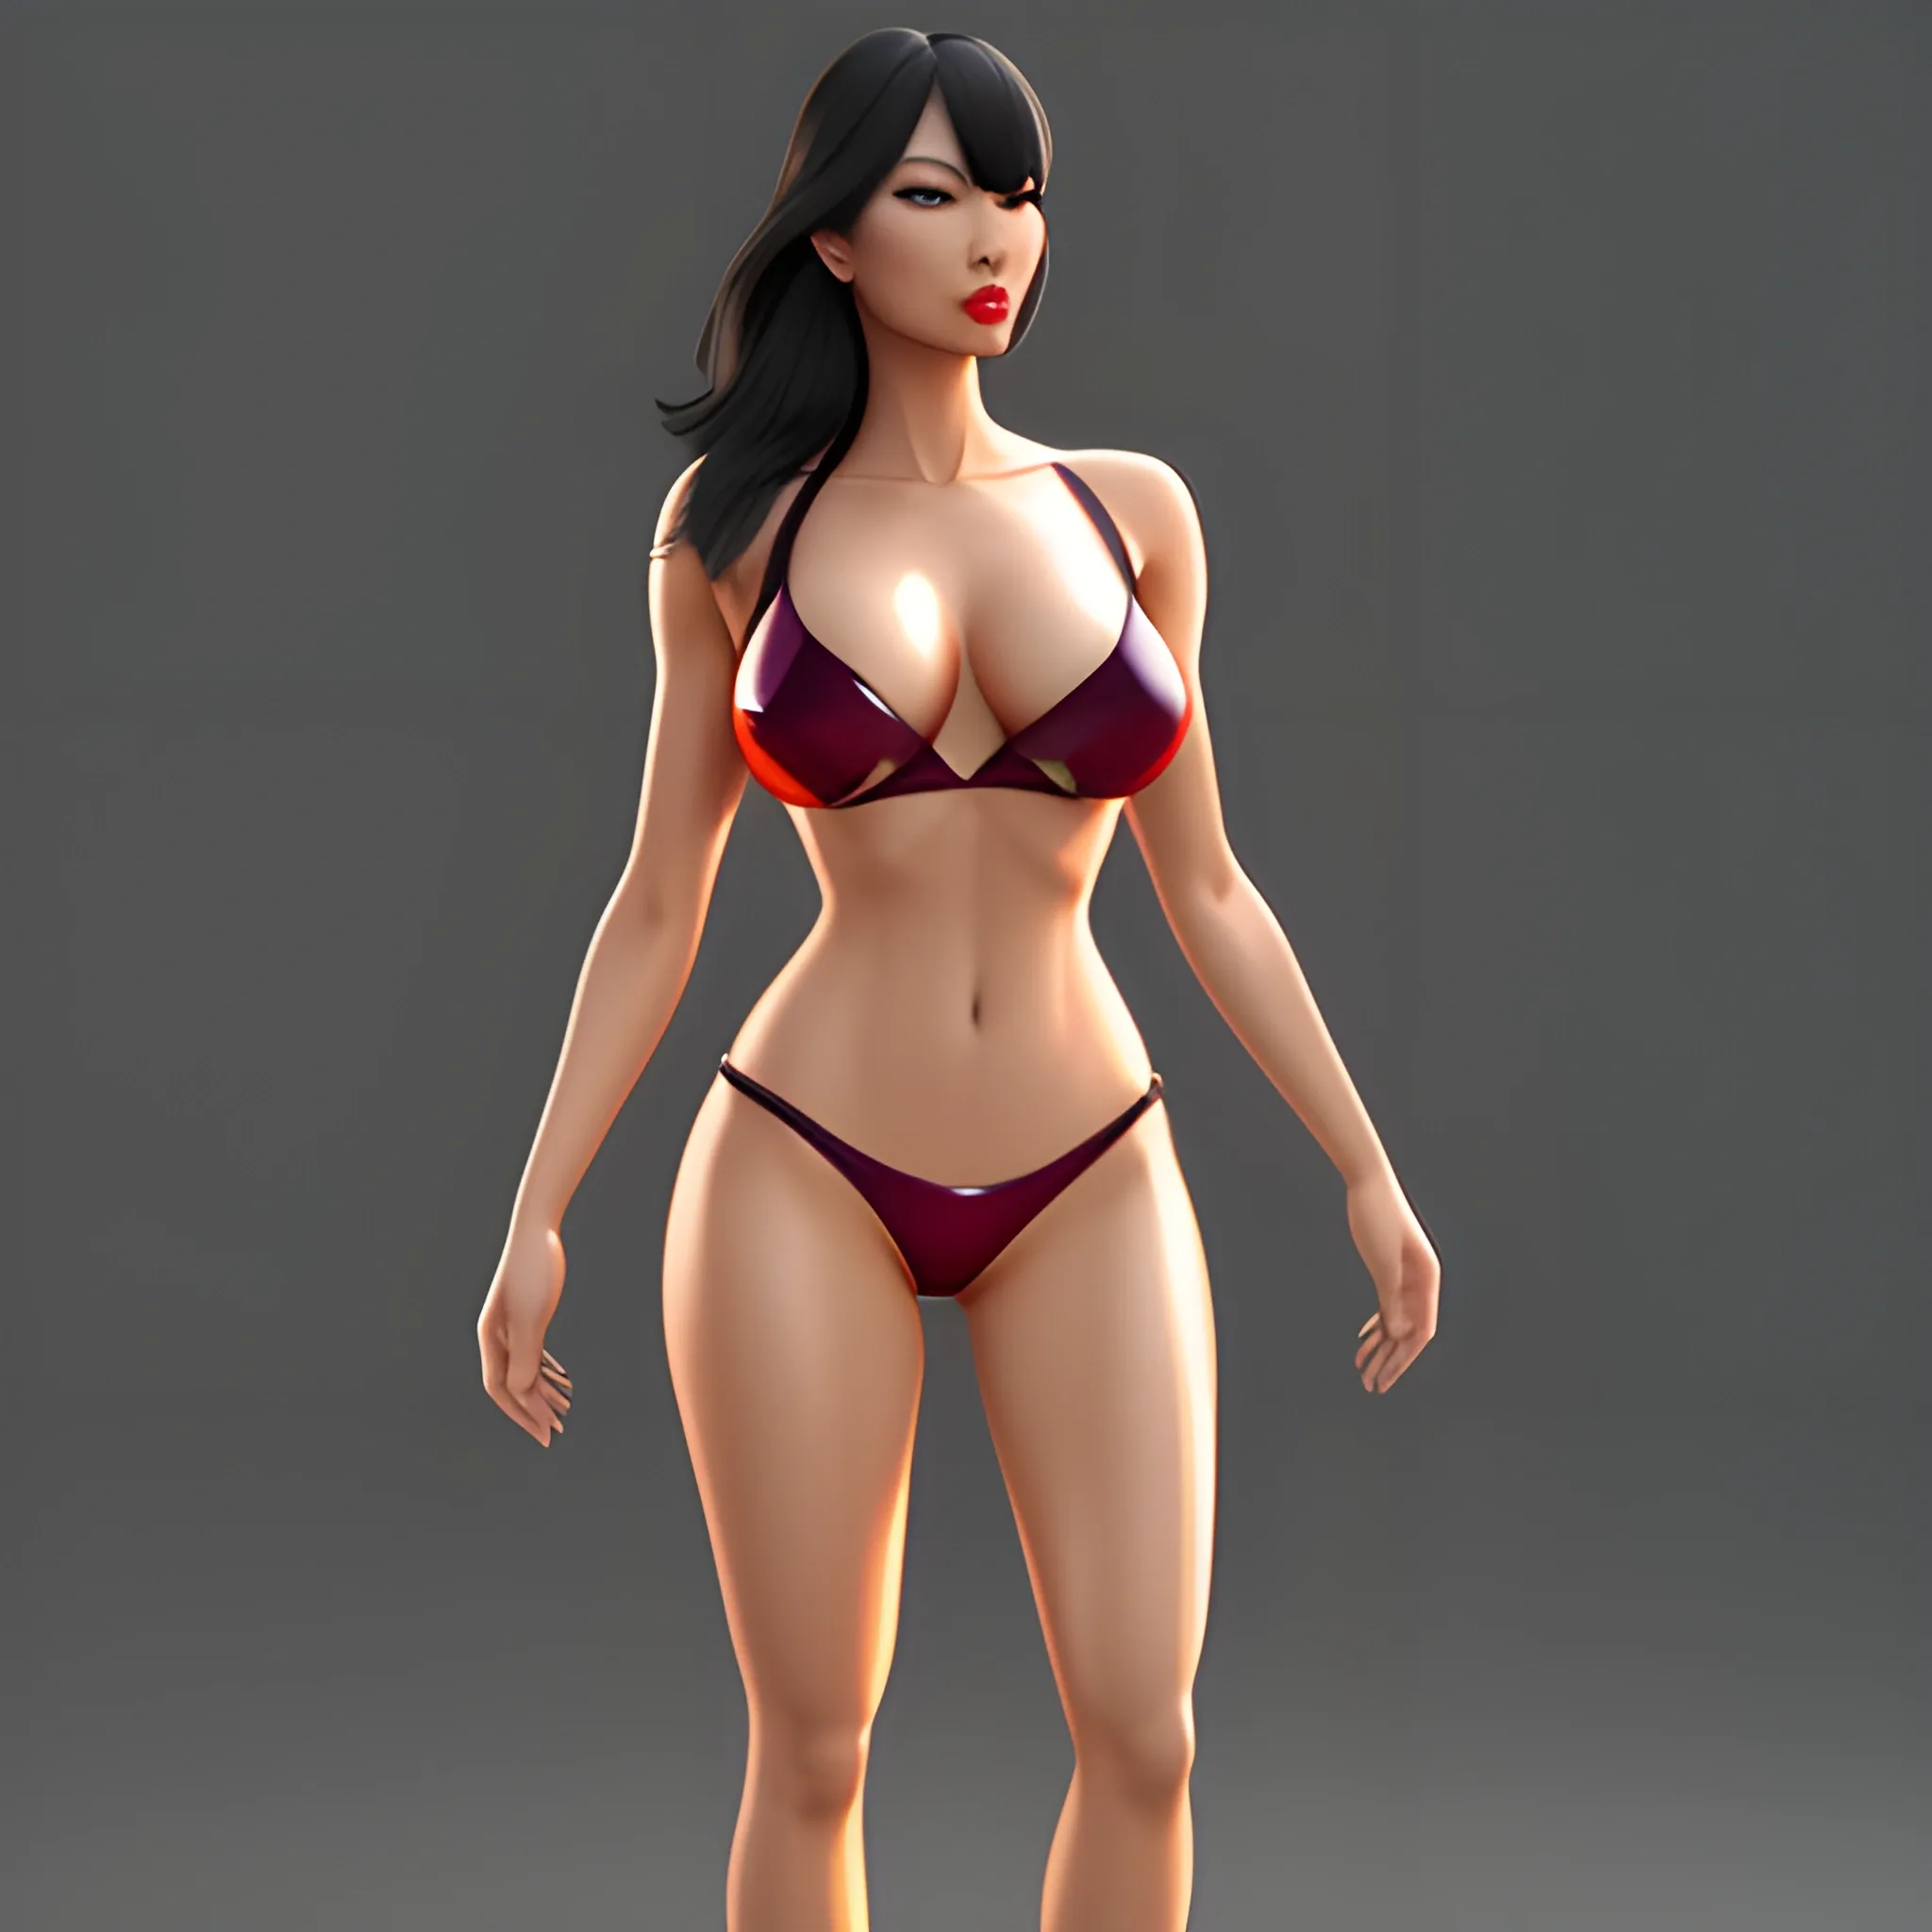 asian girl, sexy, sharp rendering, realistic, ex military, 3D, fullbody, young, hot